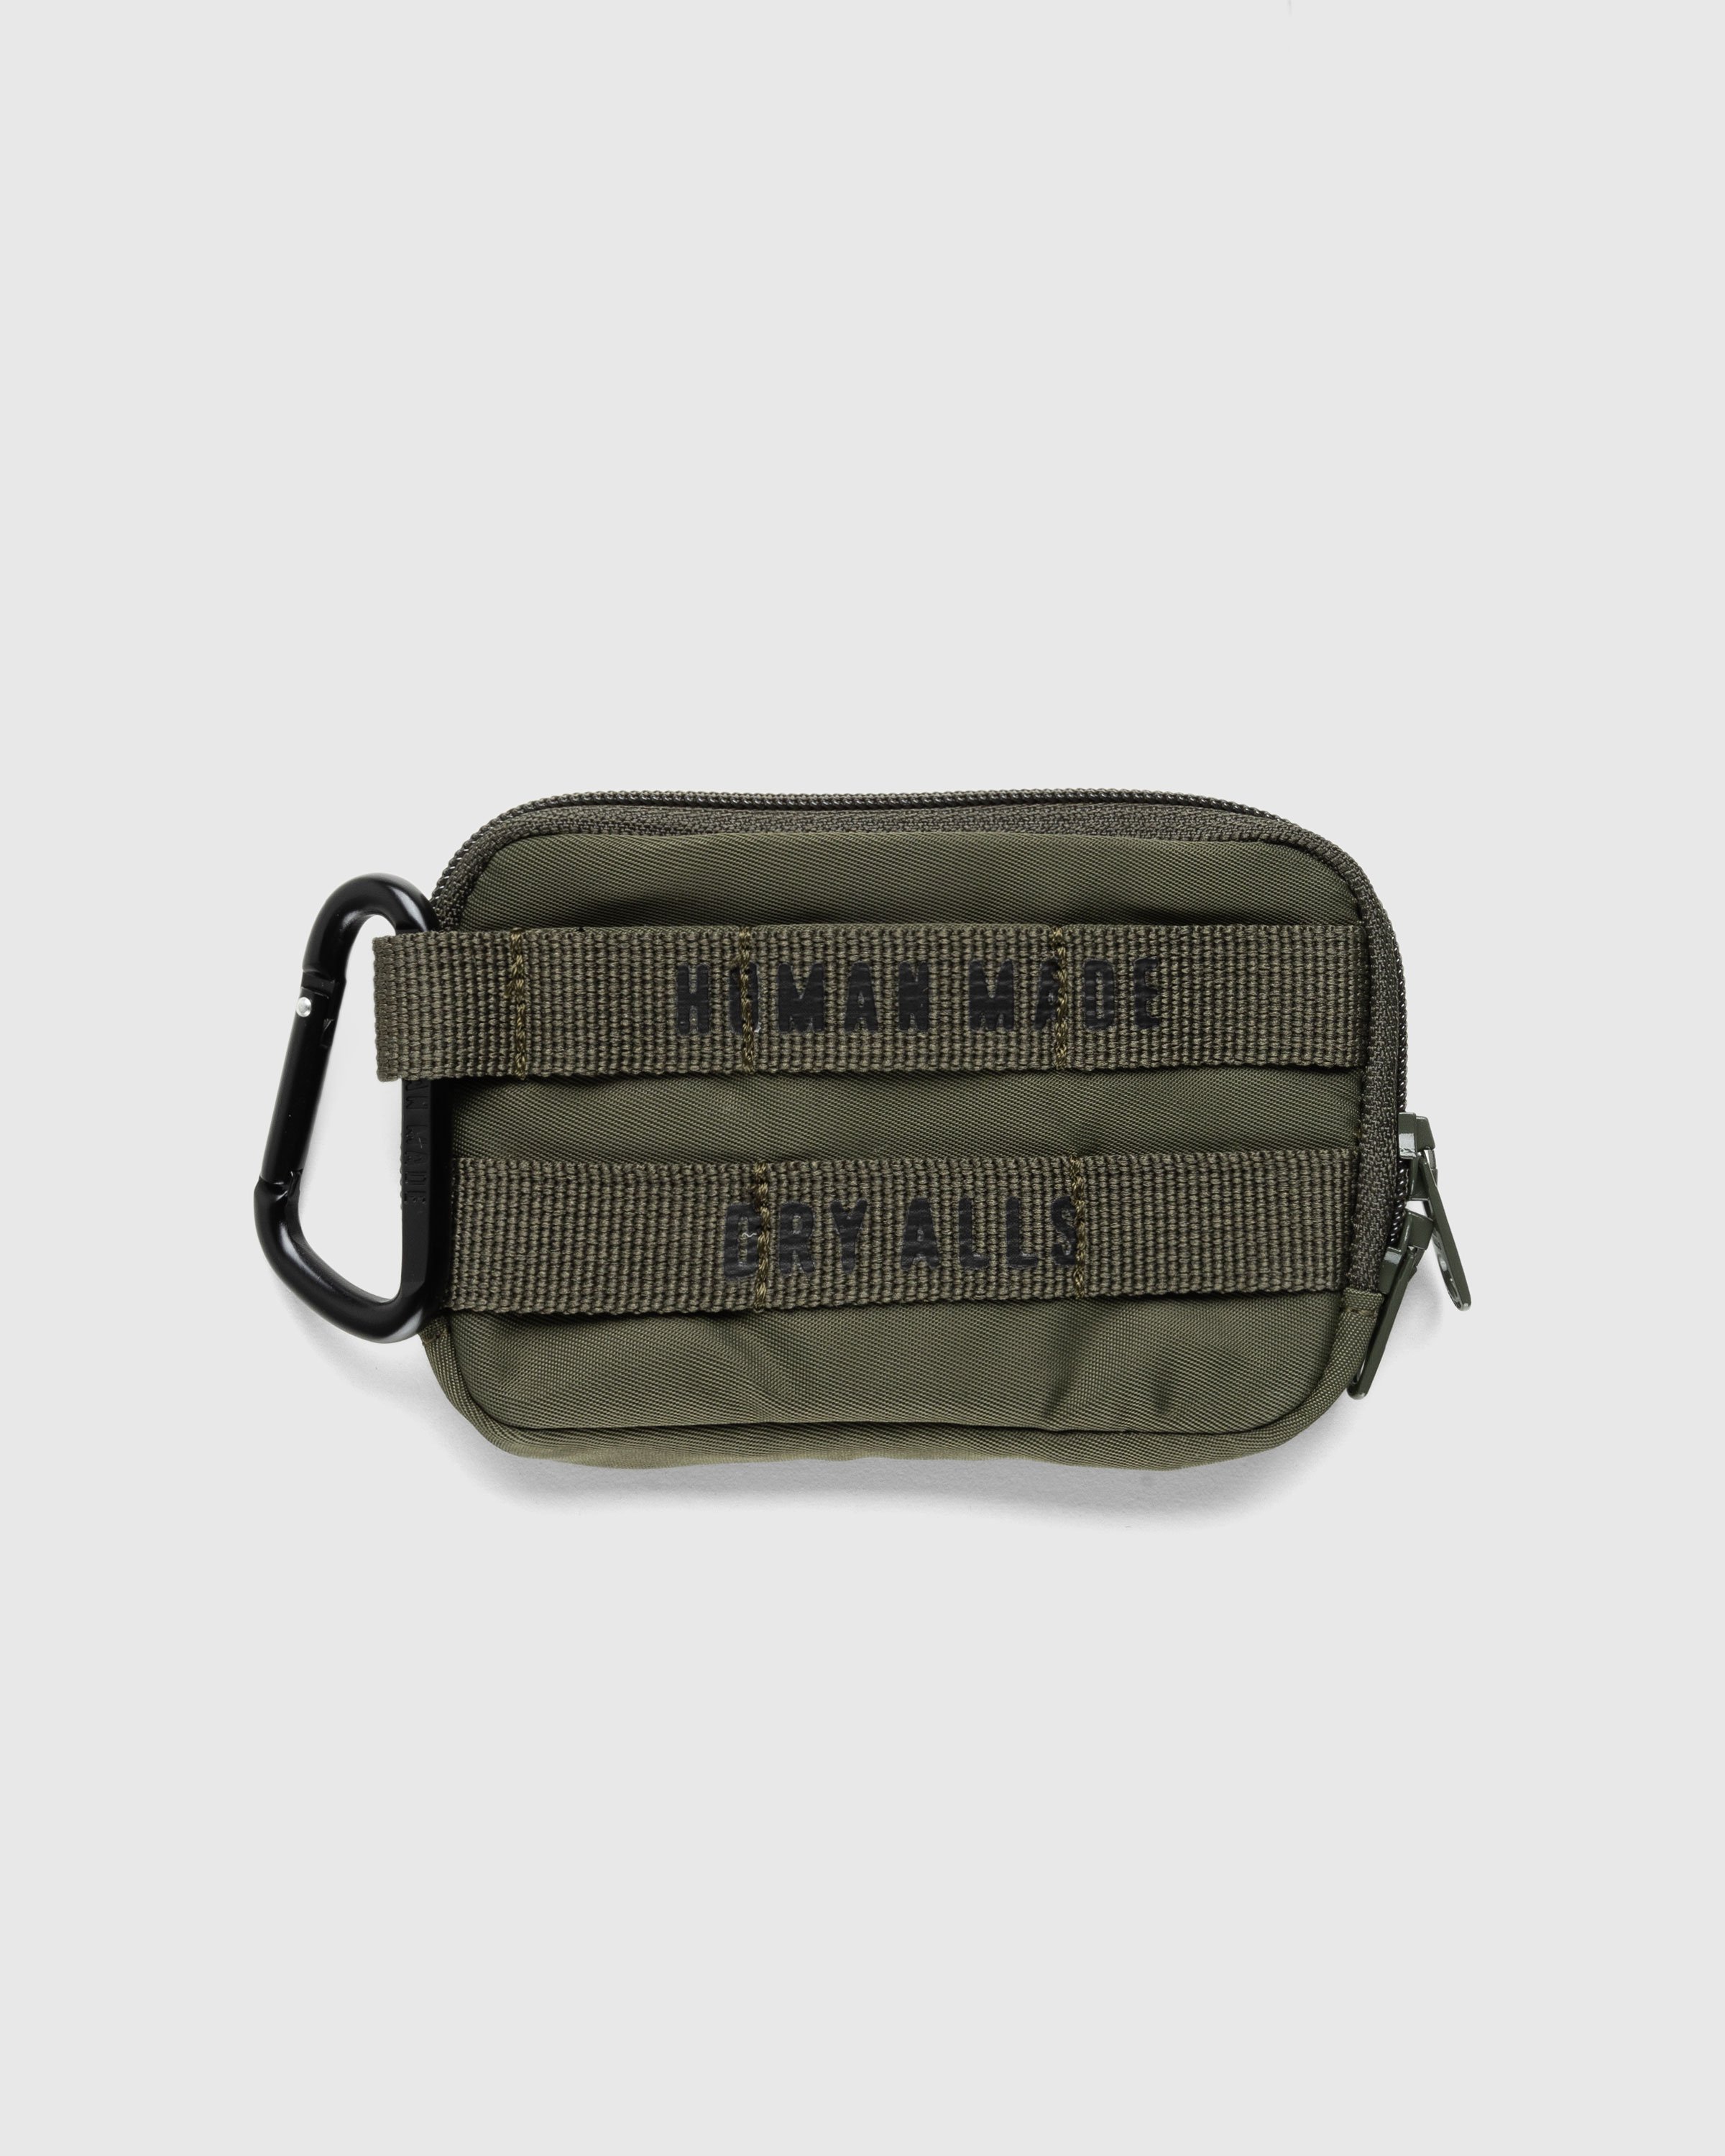 Human Made - MILITARY CARD CASE Olive Drab - Accessories - Green - Image 2